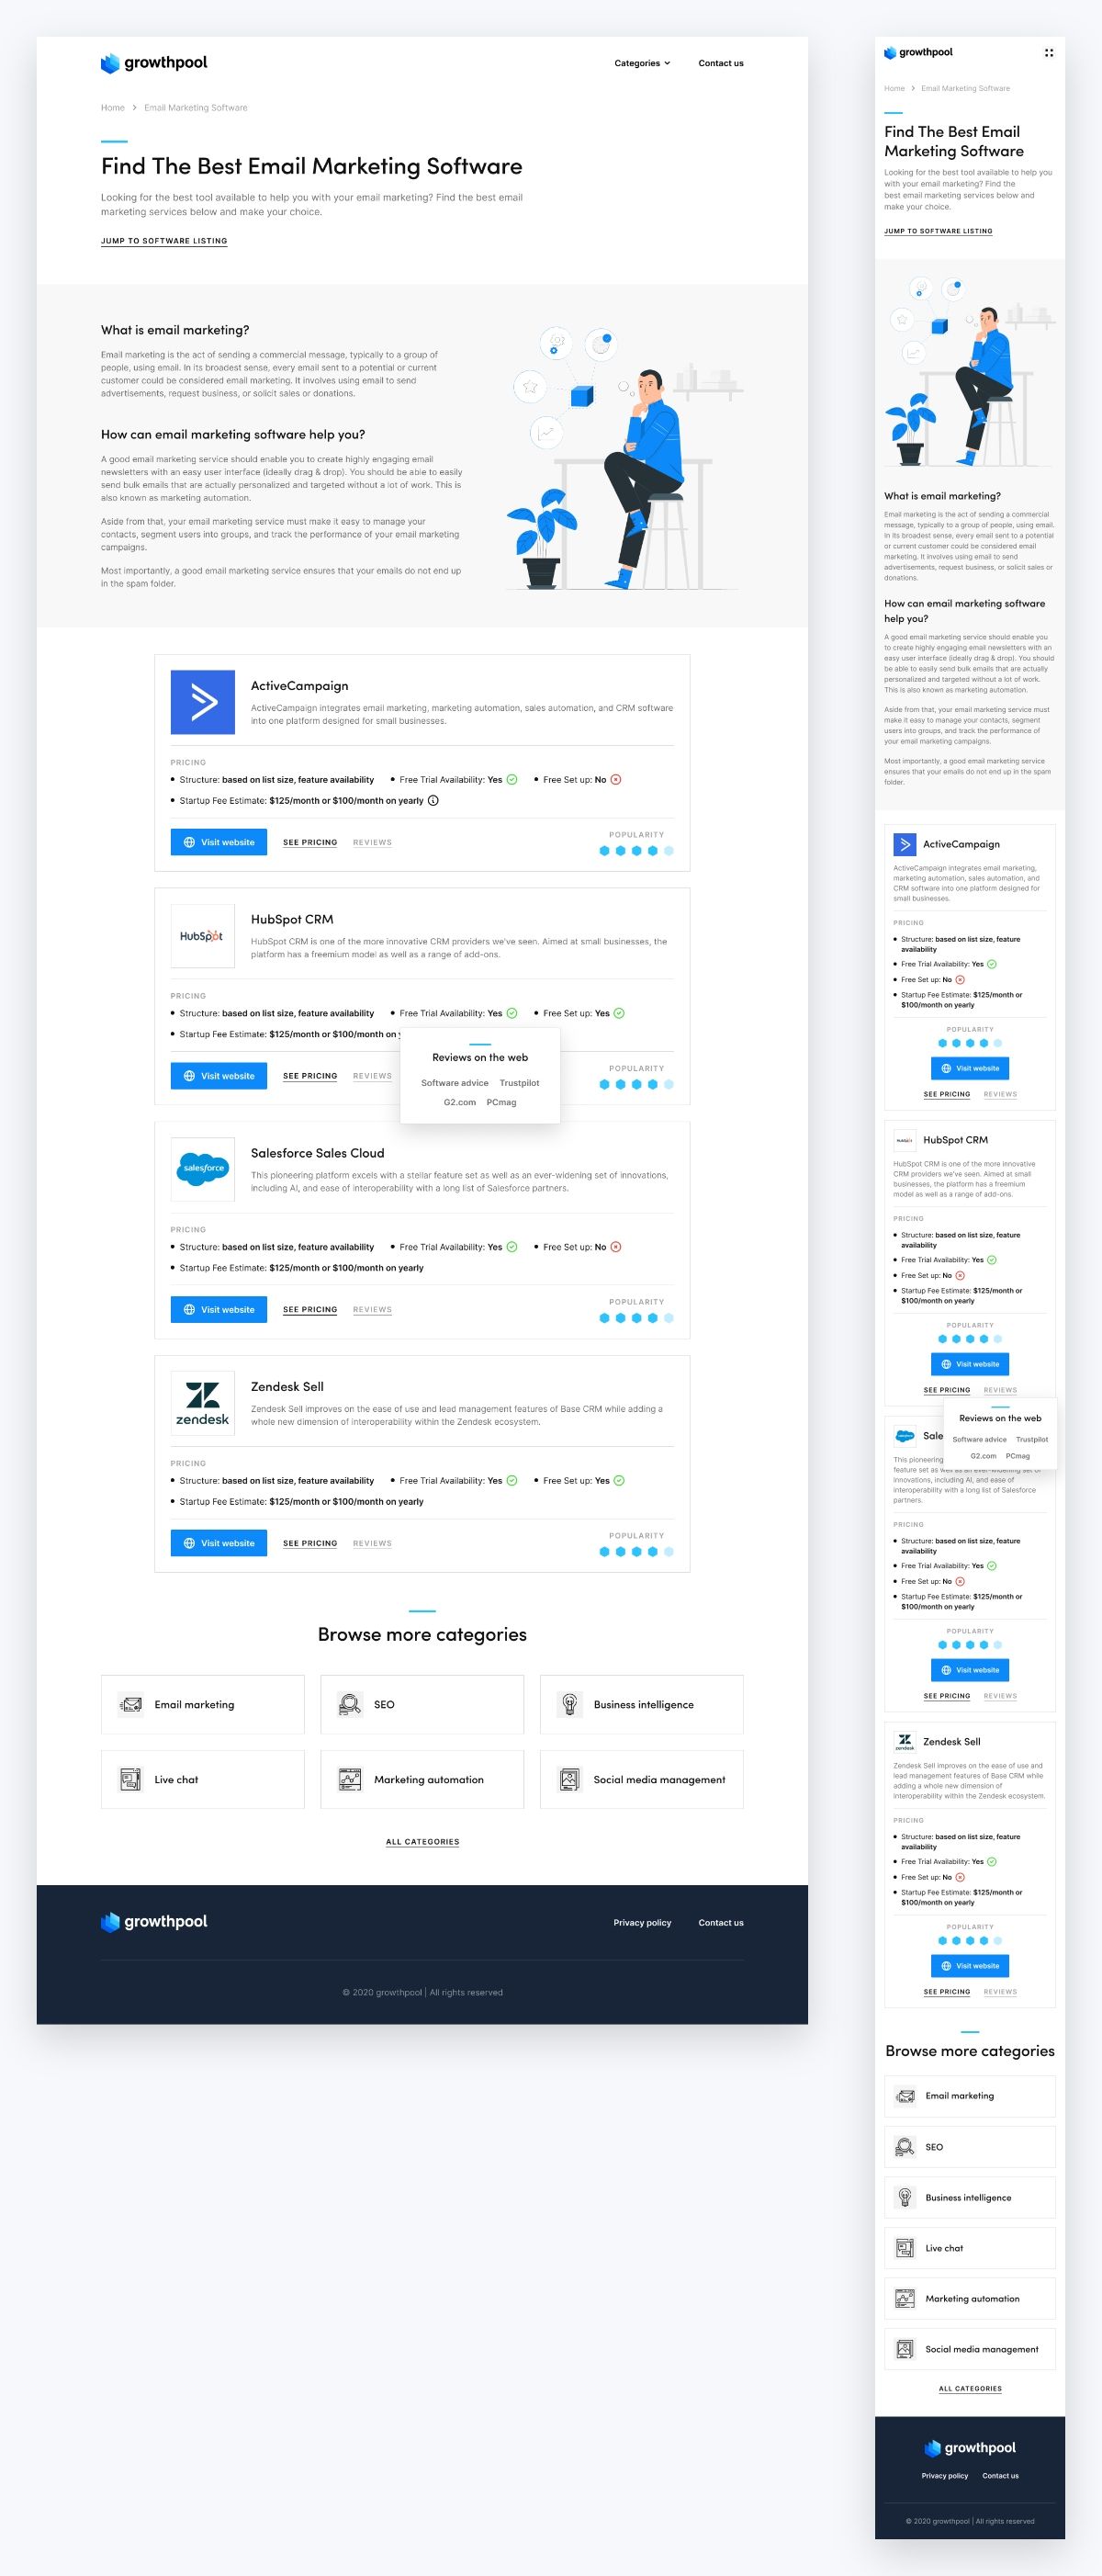 Growthpool UI design category page